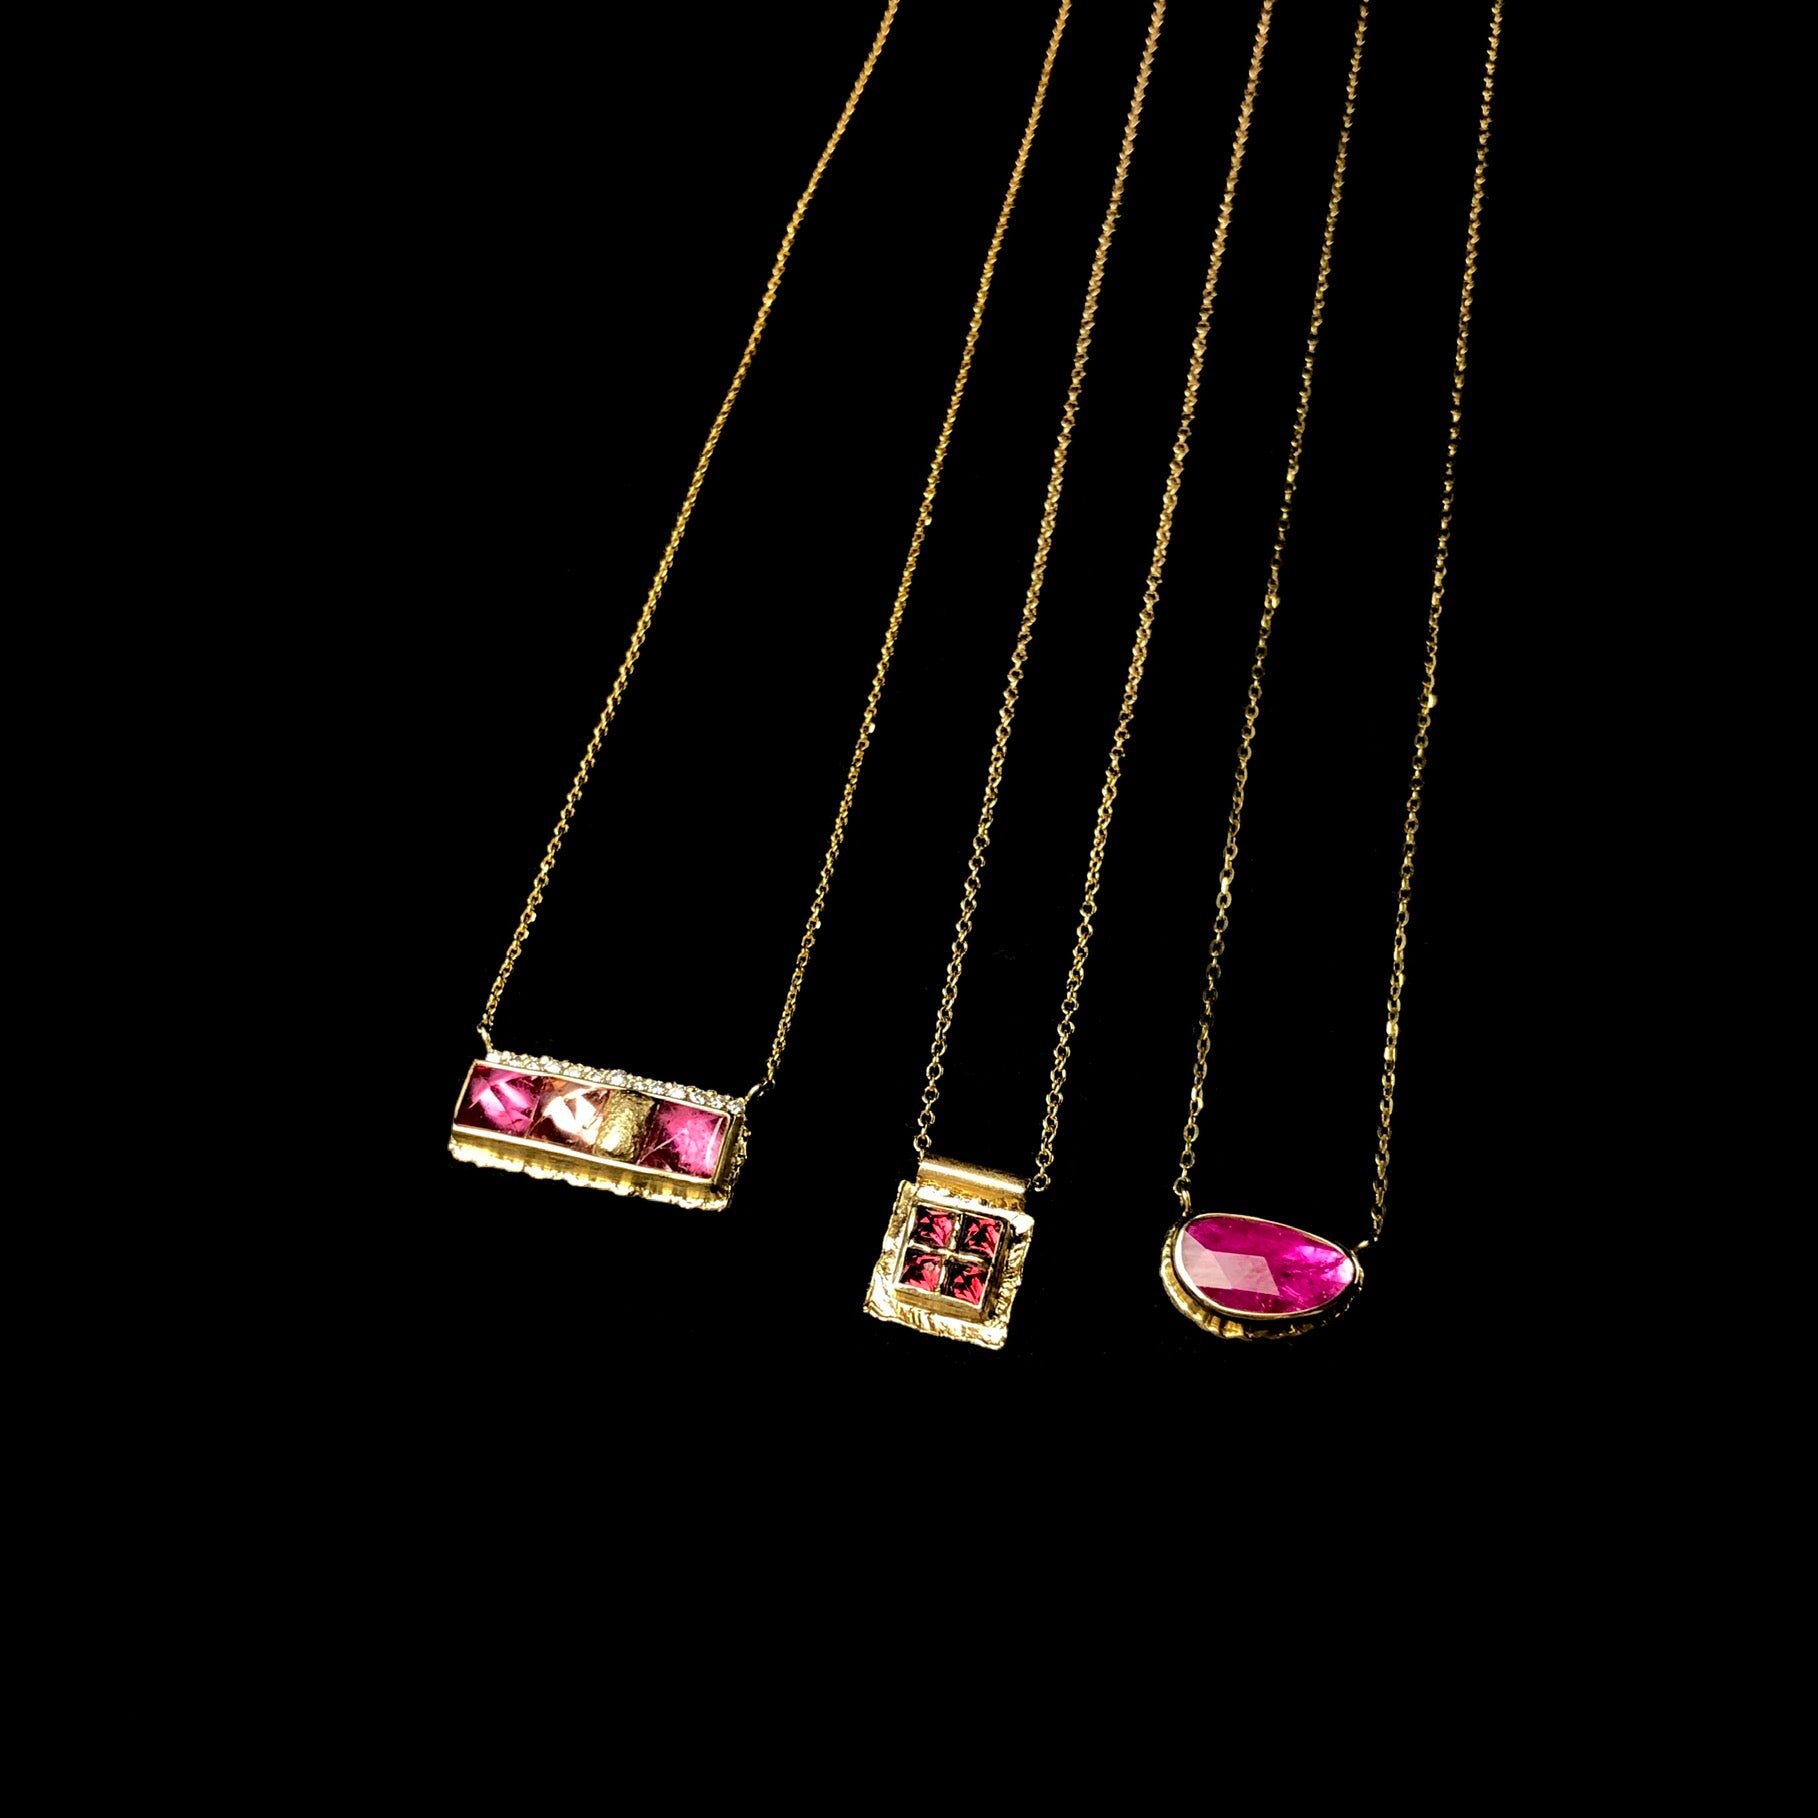 Red Spinel Mosaic Necklace with two other Jamie Joseph Necklaces